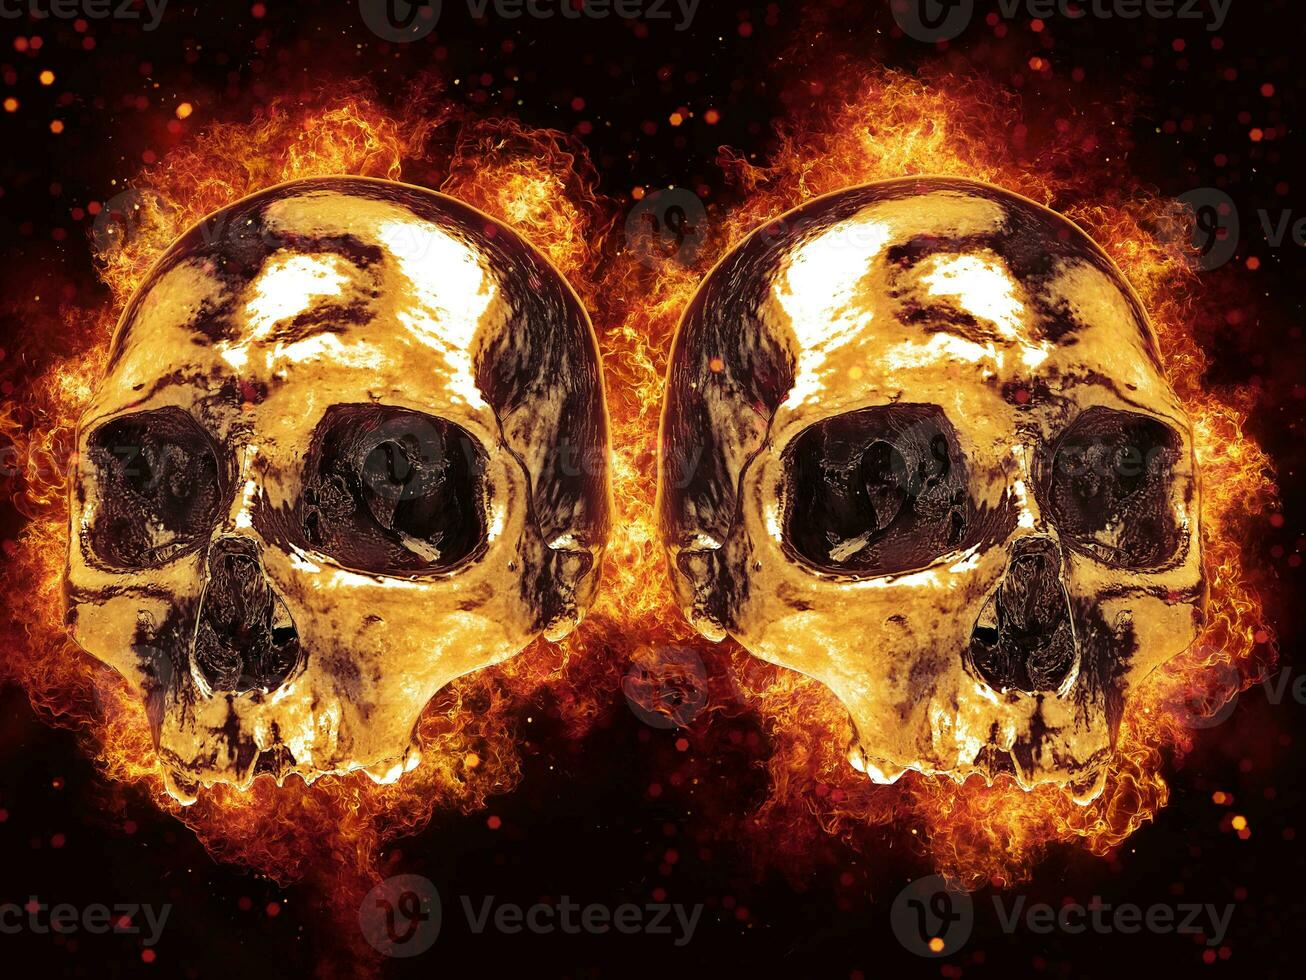 Two skulls side by side engulfed in flames photo